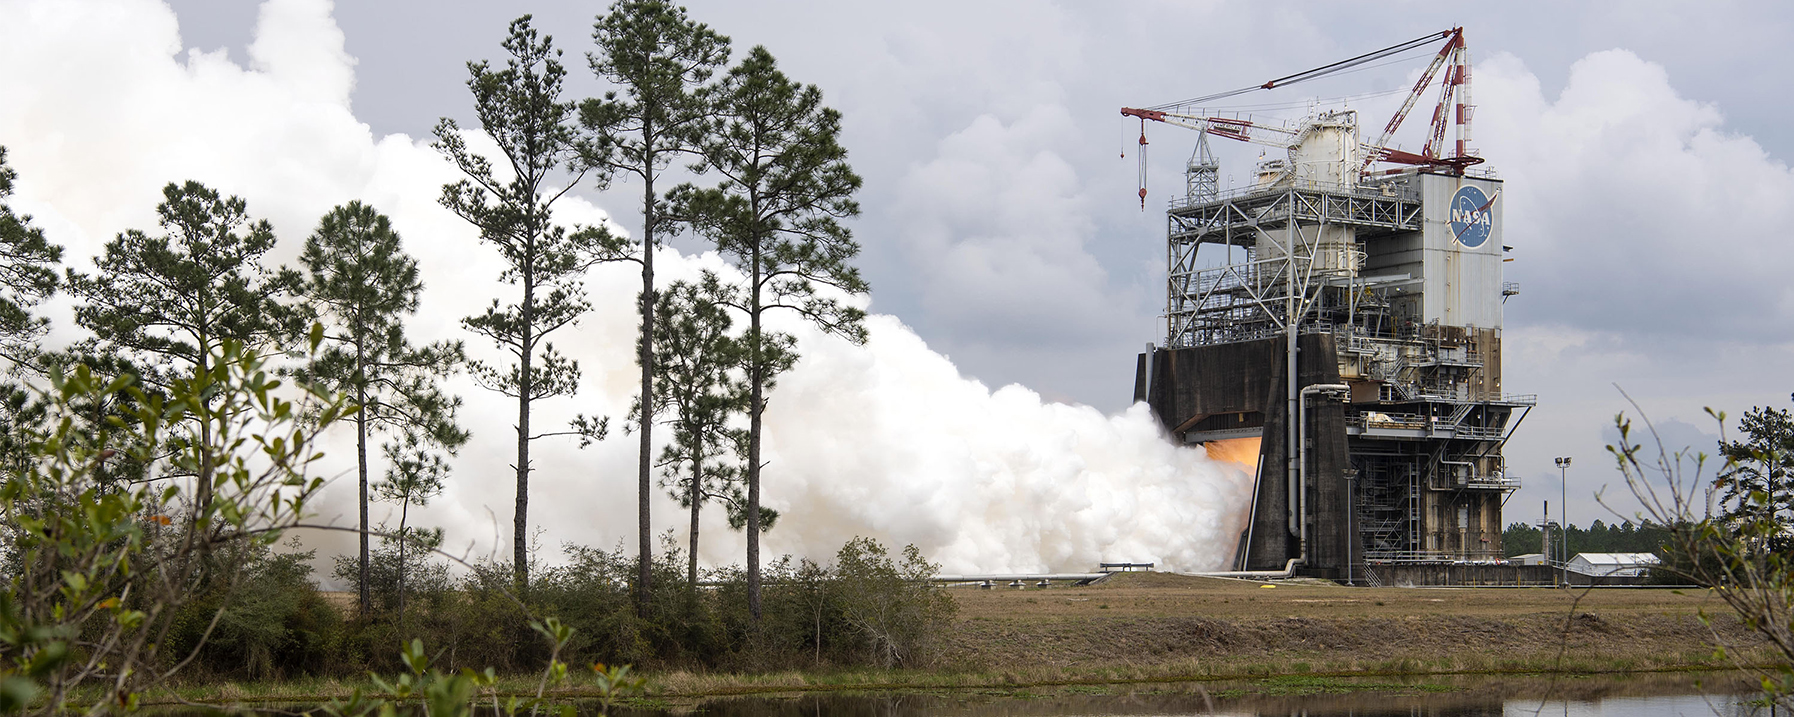 NASA marked yet another milestone in preparations for the first mission of its new Space Launch System (SLS) rocket Feb. 28.